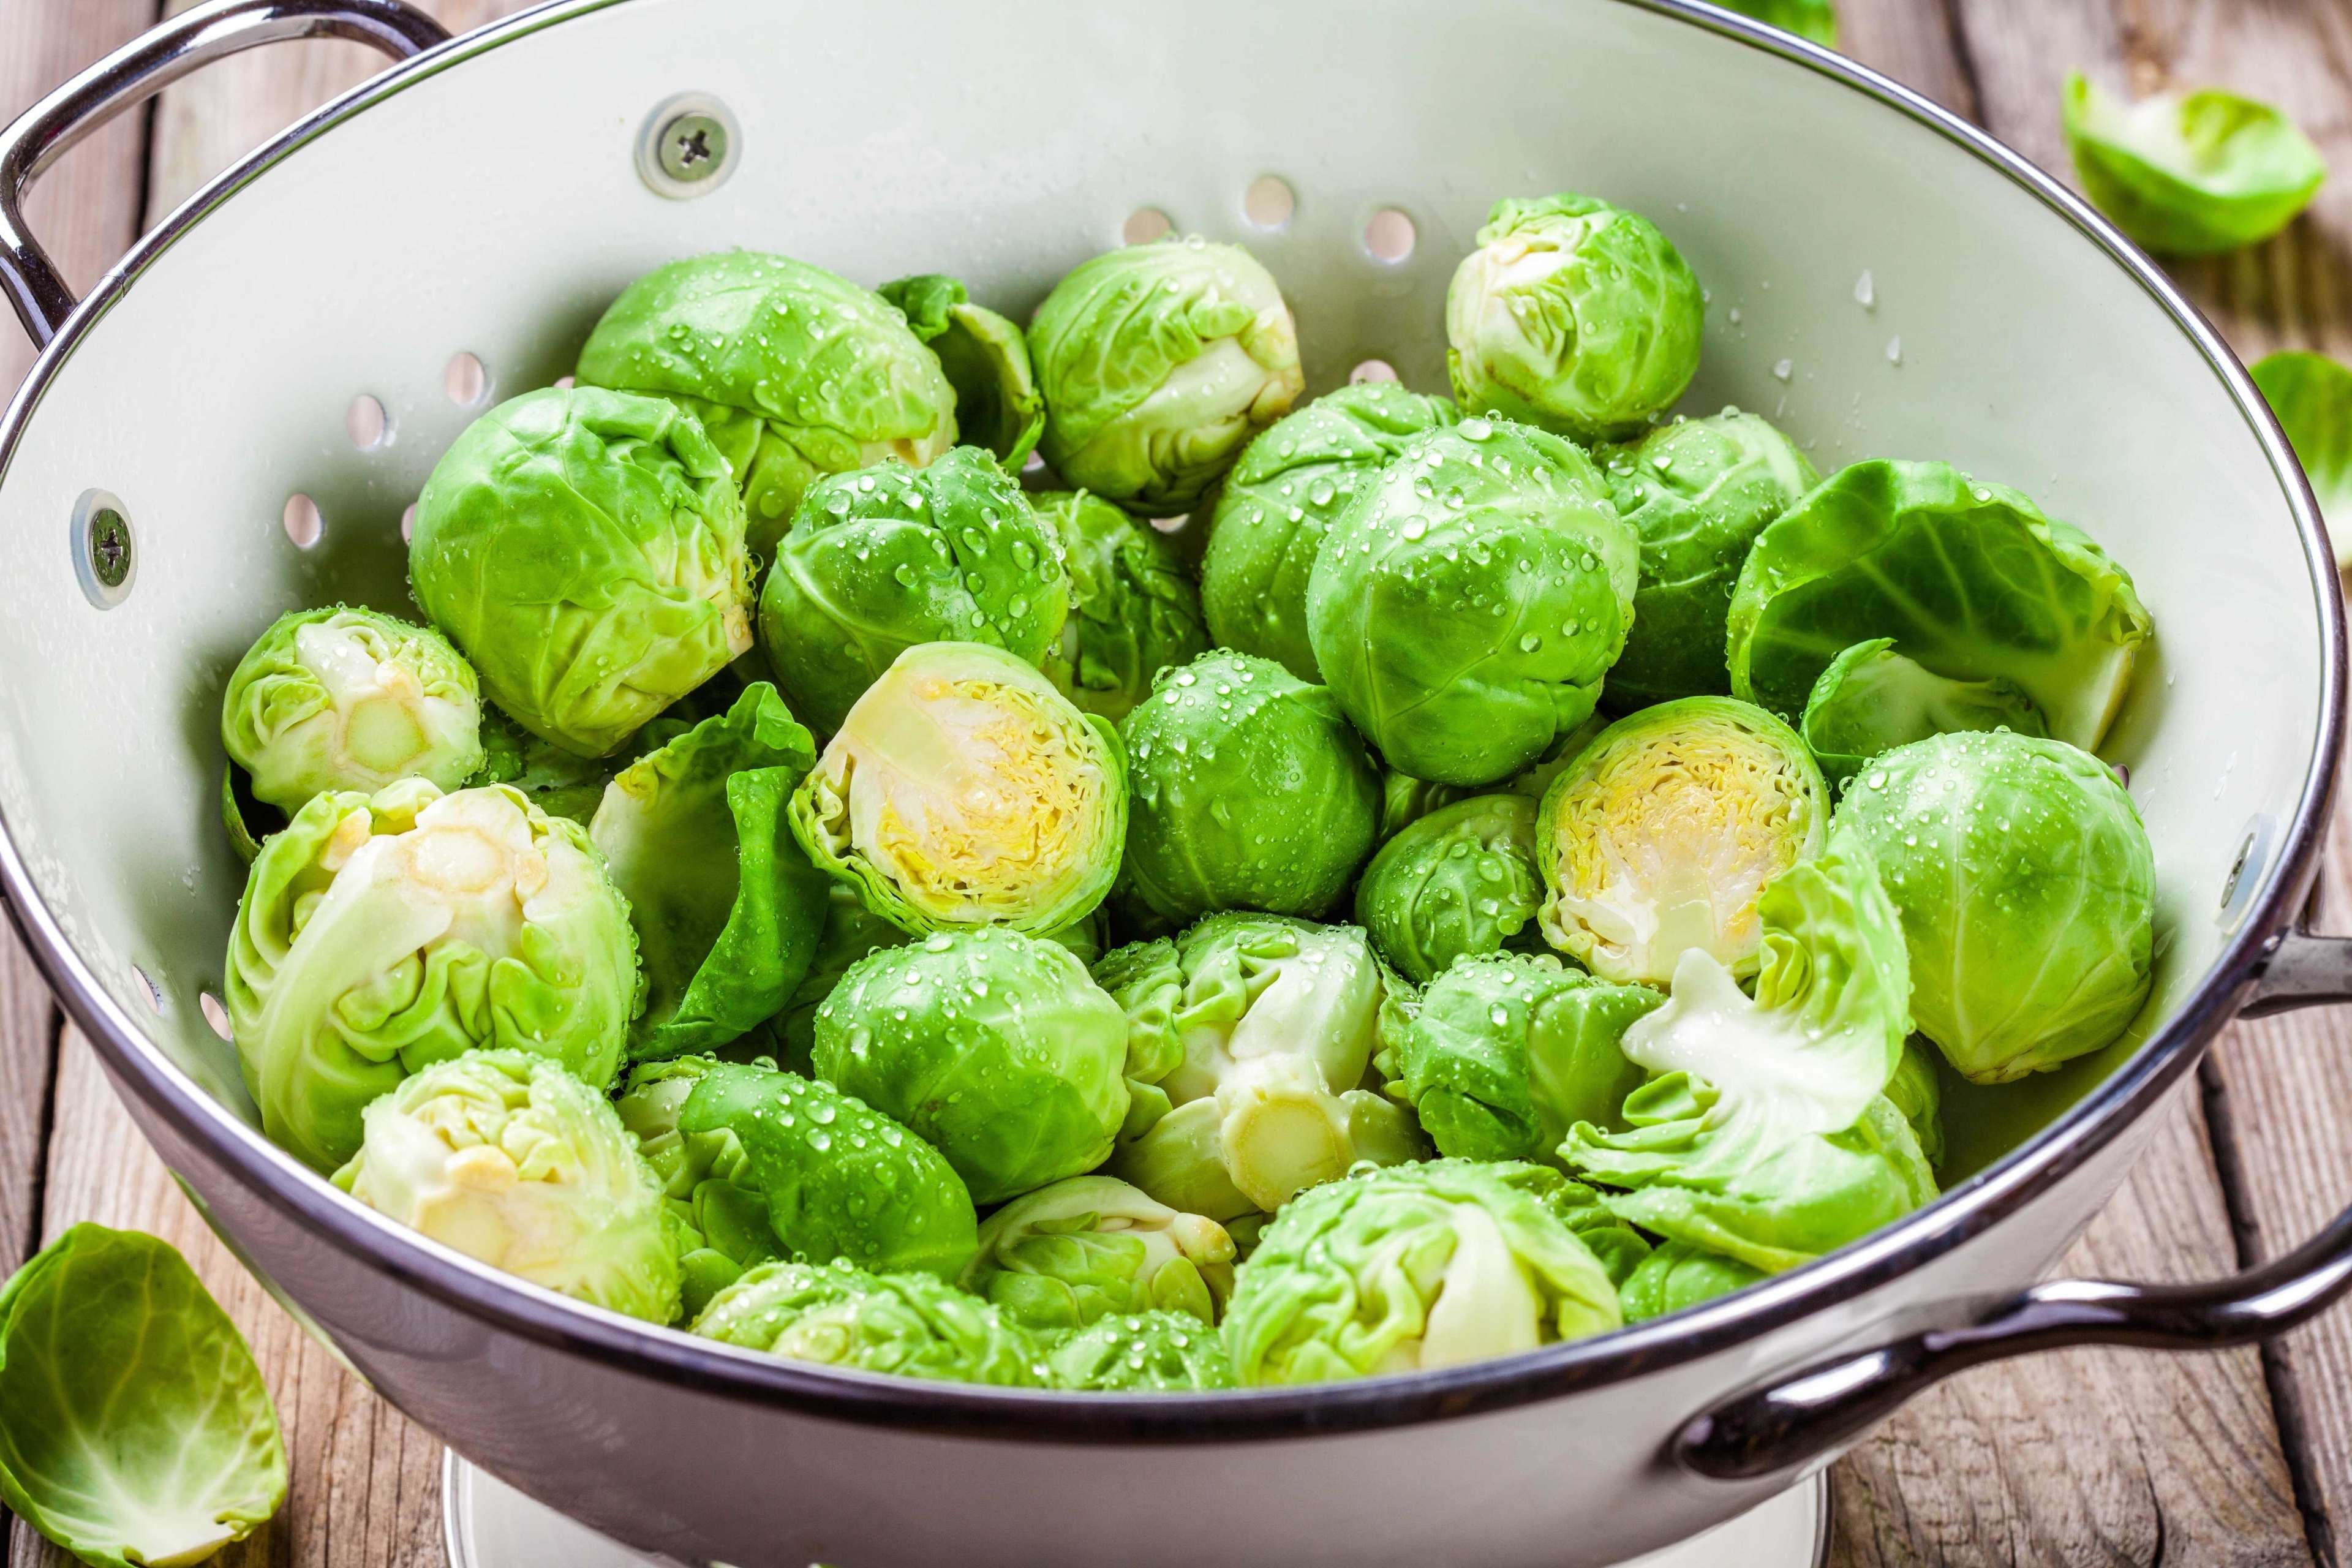 61a90dccb171982200e73044_brussels%20sprouts%20in%20a%20colander.jpeg